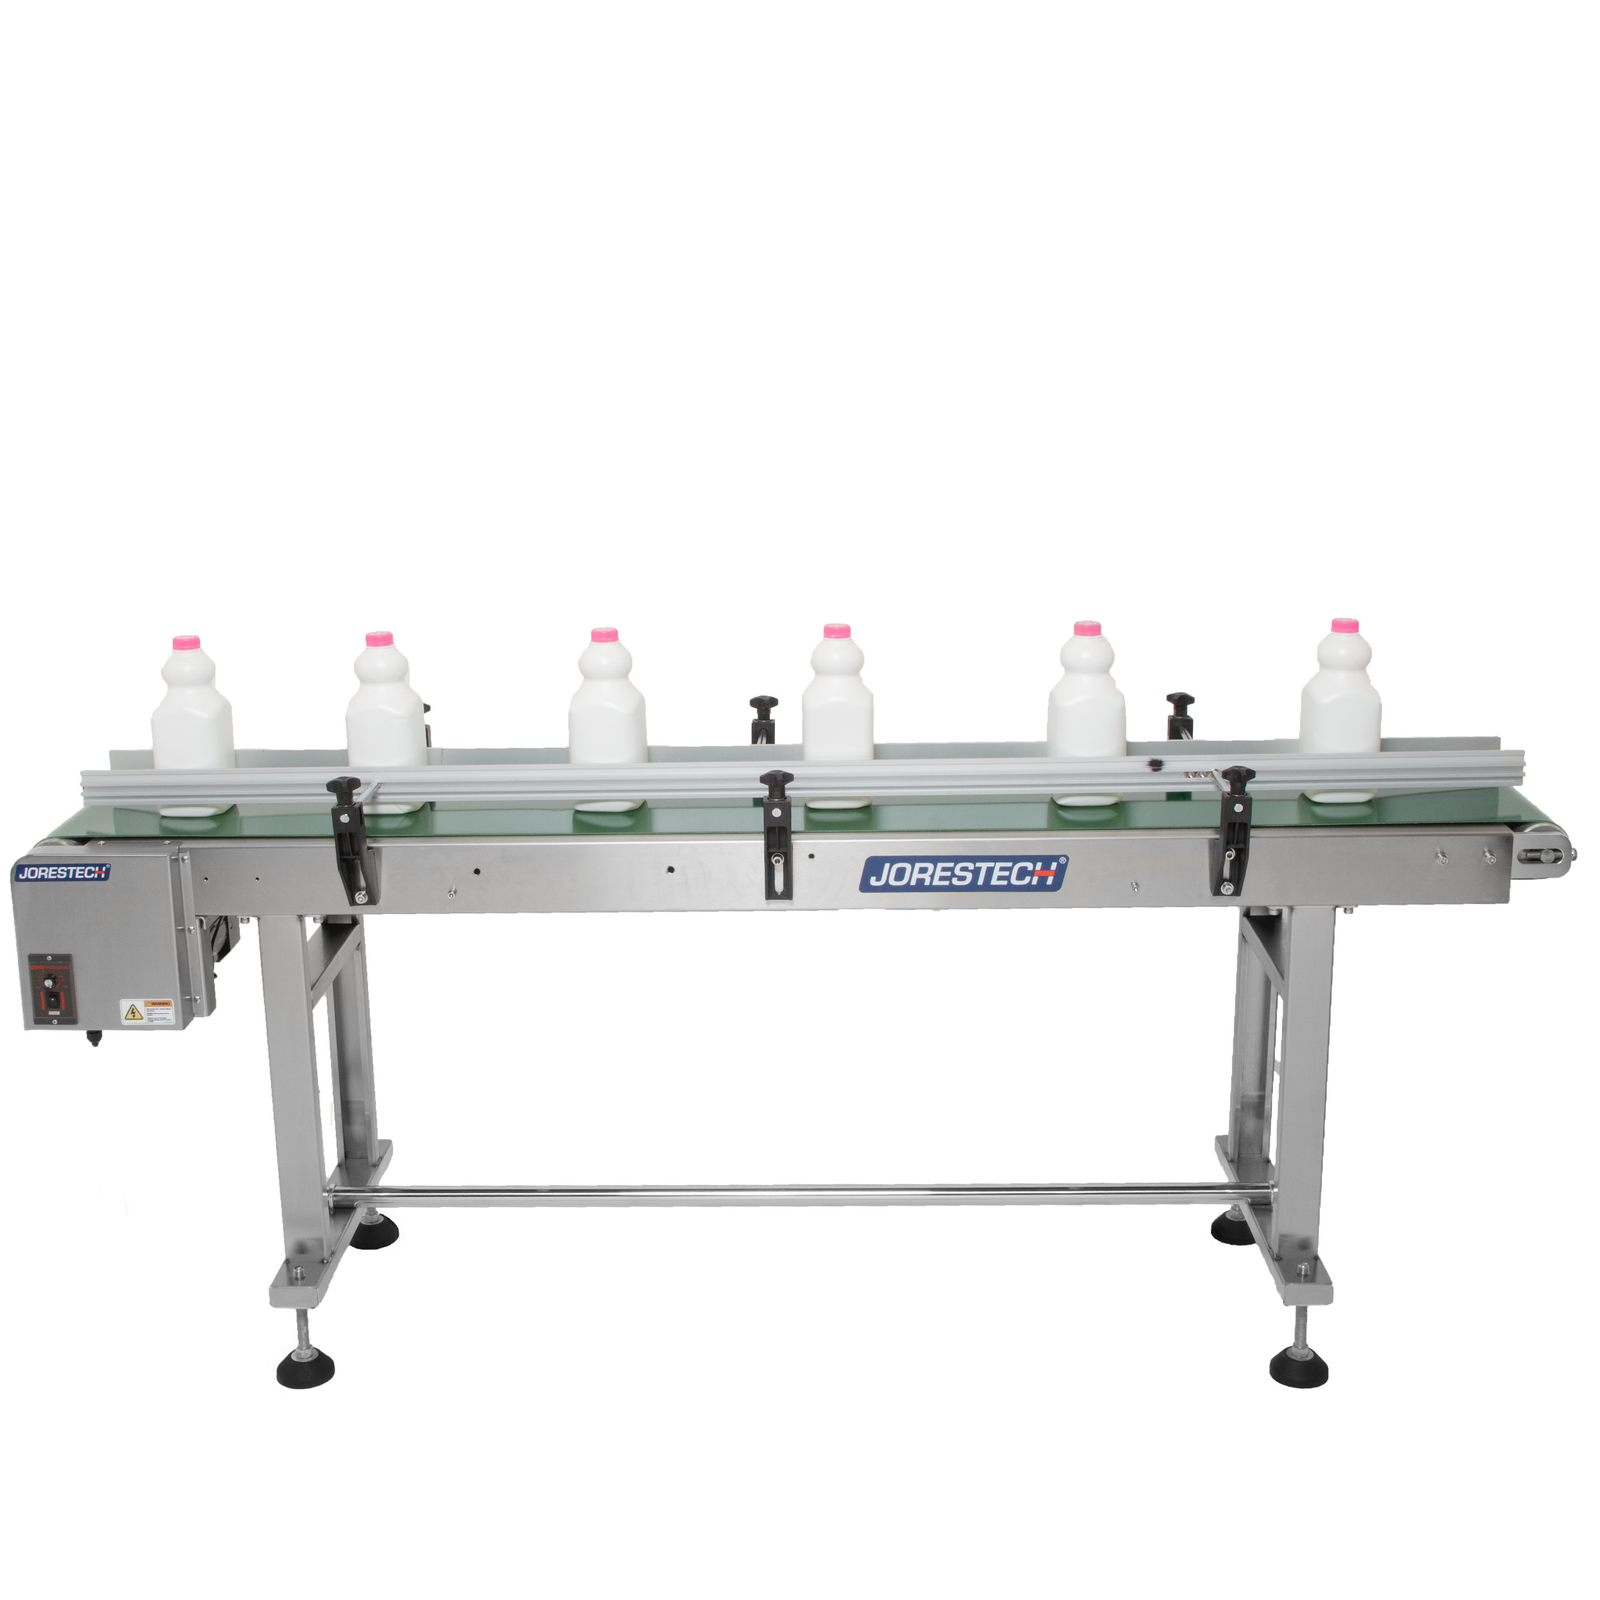 white milk bottles with pink tops on motorized conveyor with steel frame and green belt that features side guard rails.